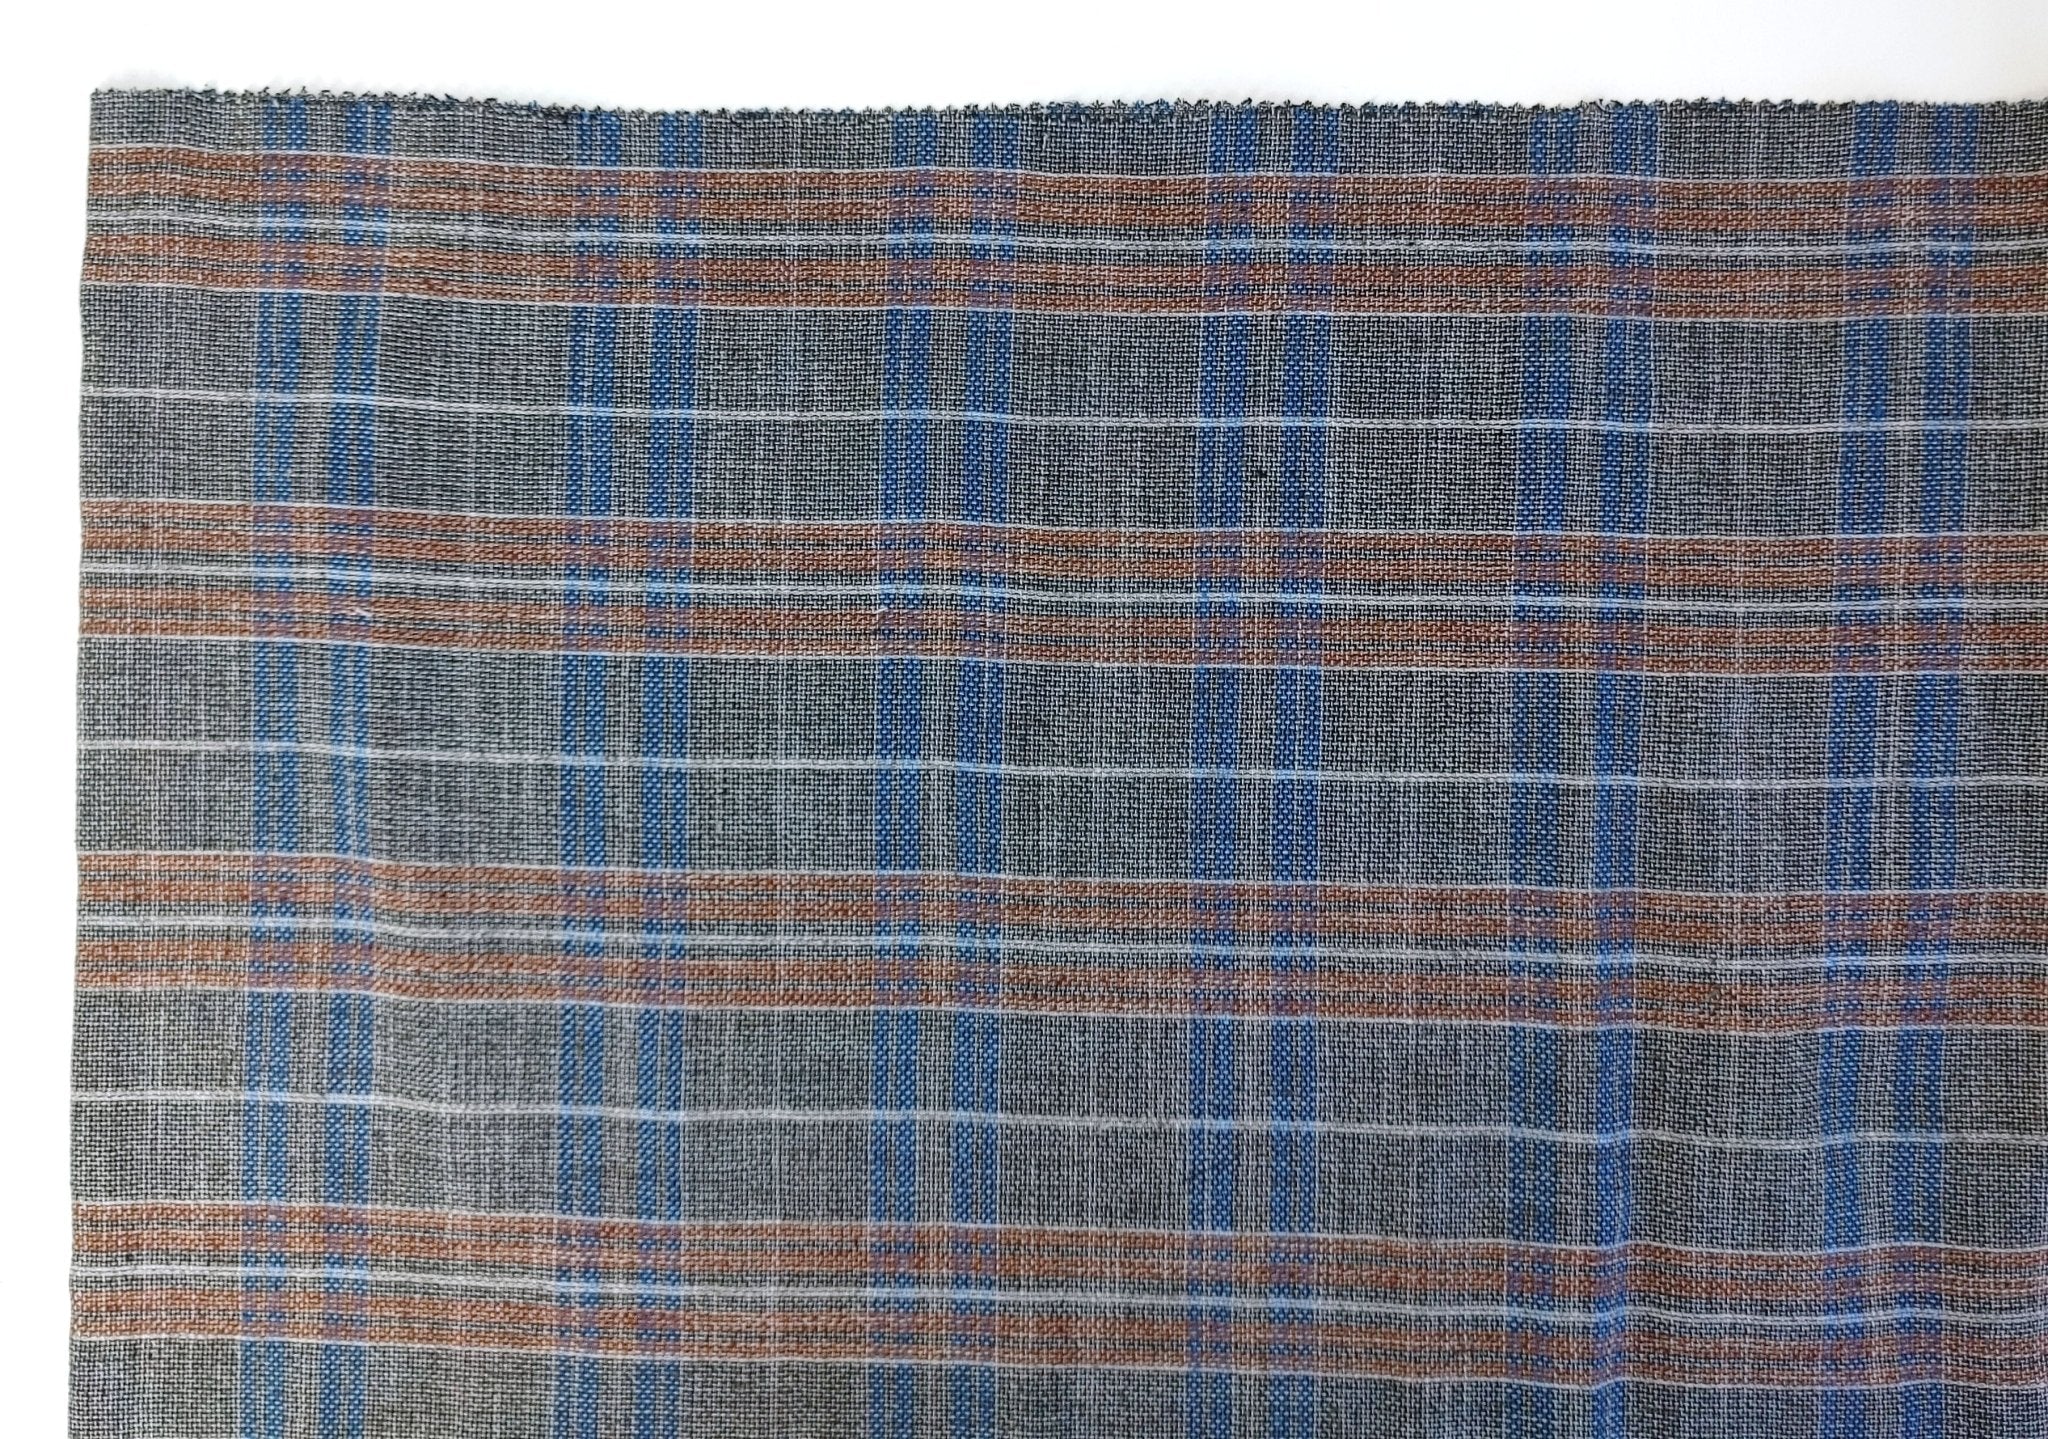 Linen Cotton Polyester Dobby Plaid Fabric 7103 - The Linen Lab - Brown